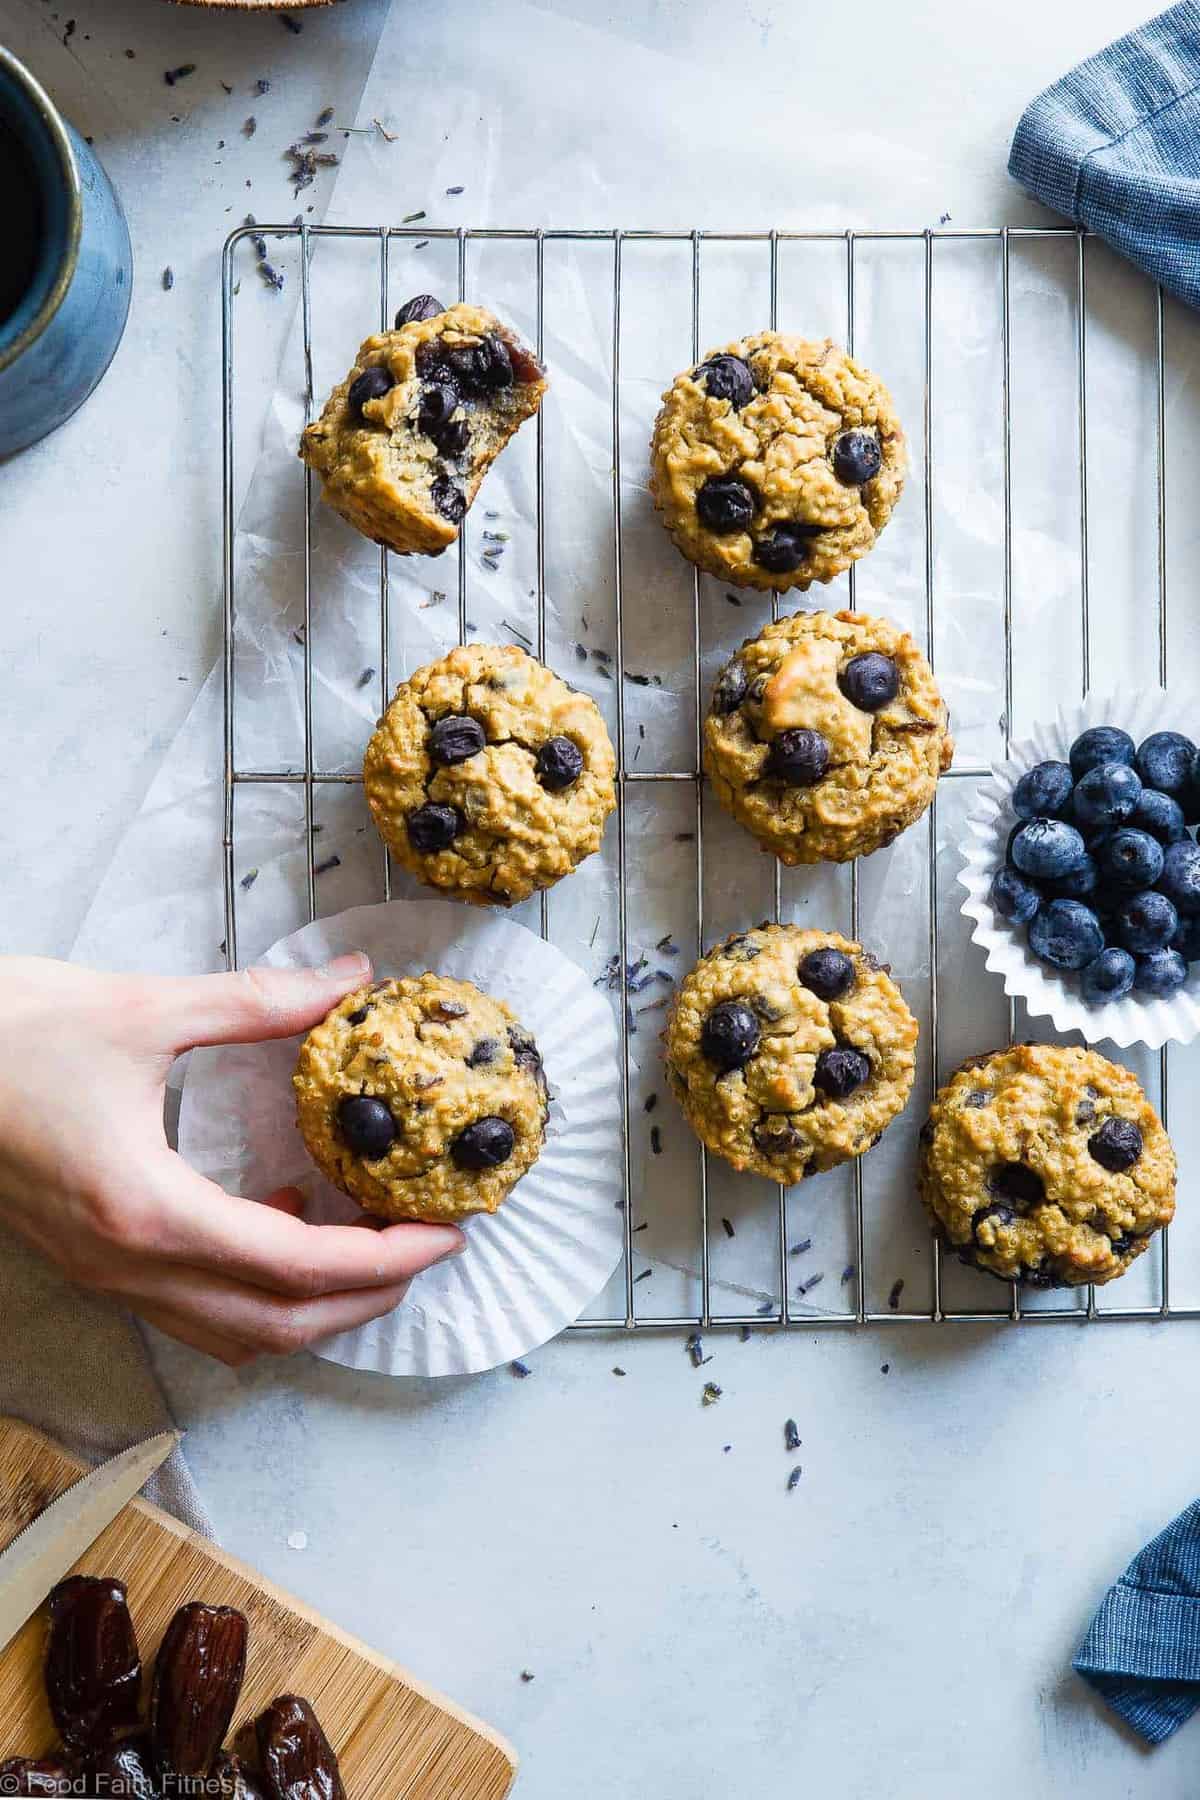 High Protein Blueberry Quinoa Muffins - Naturally sweetened, gluten free, dairy free and packed with plant based protein and fiber! These muffins are quick and easy to make and great for kids lunchboxes or snacks! Adults love them too! | #Foodfaithfitness | #Glutenfree #Dairyfree #Proteinpowder #Healthy #Quinoa